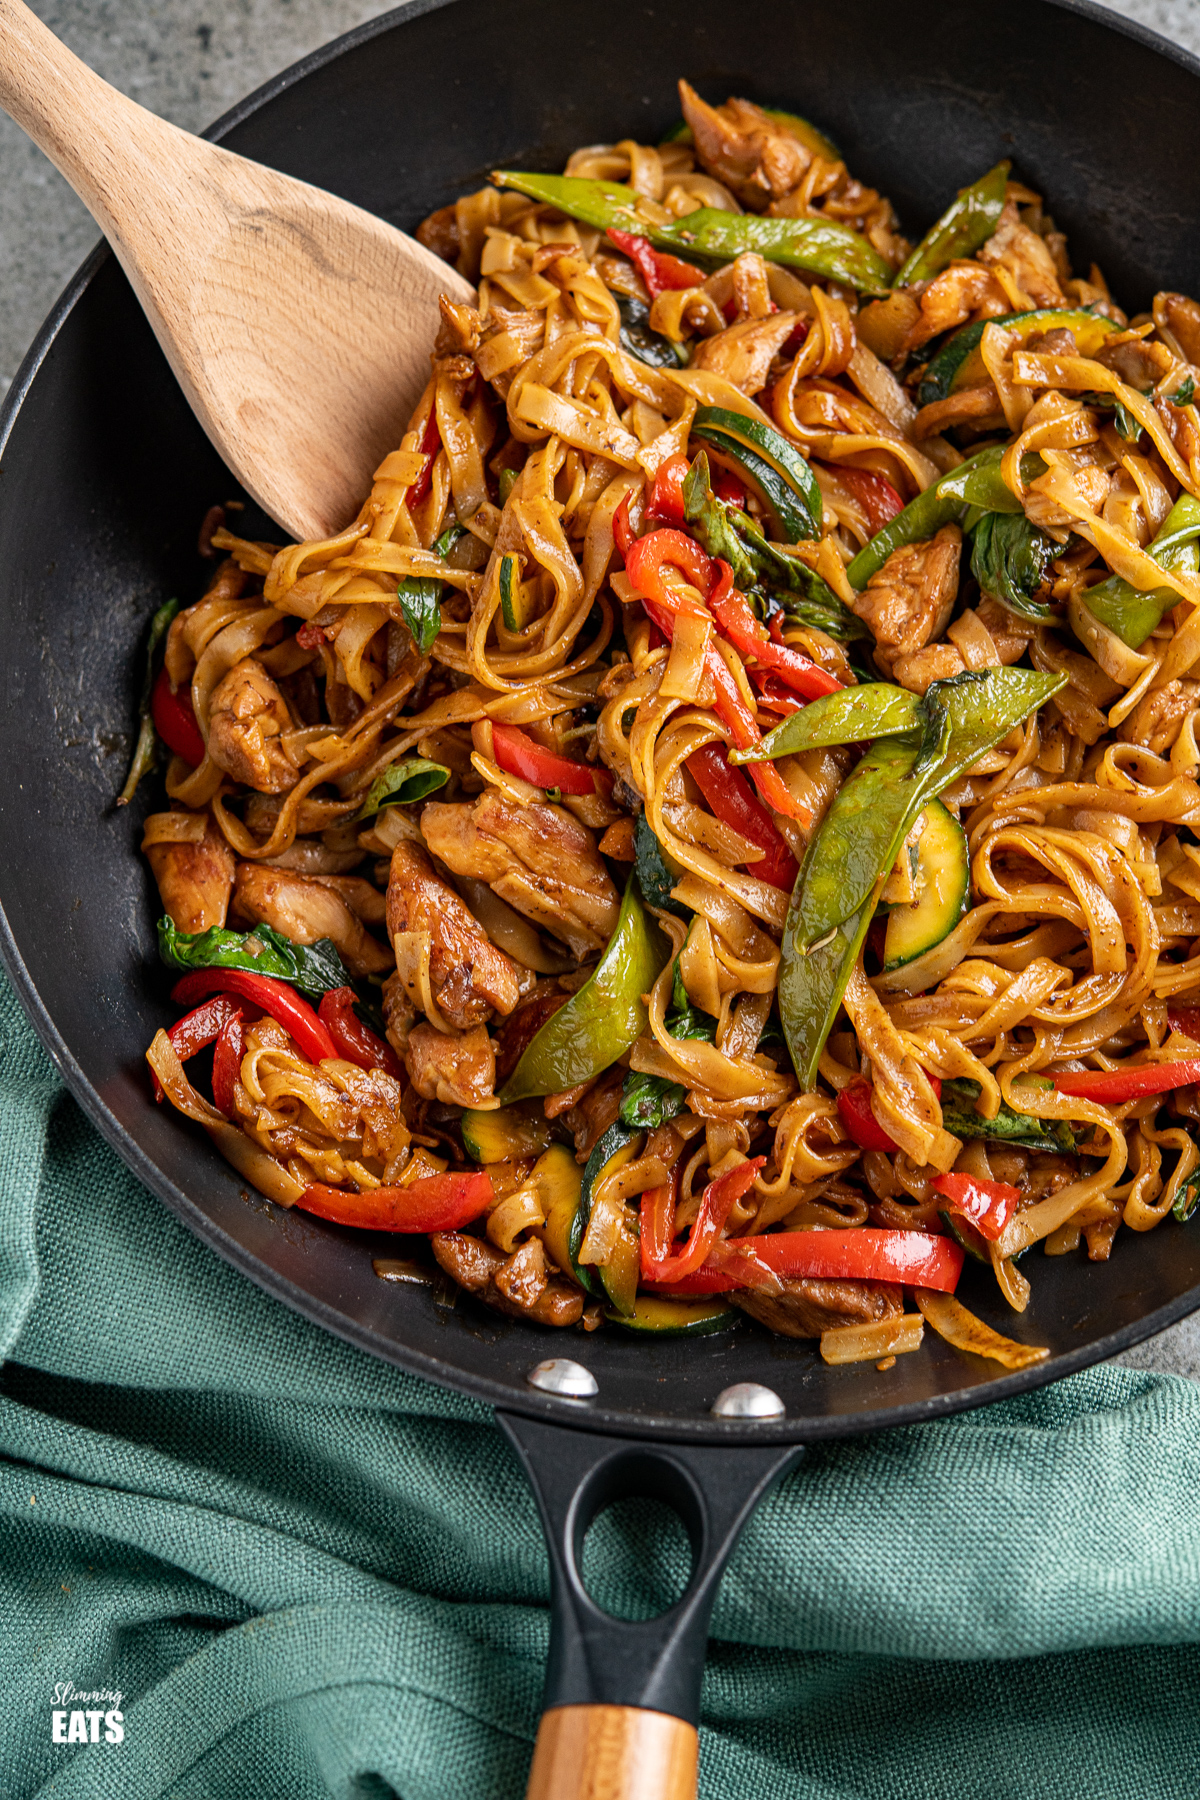 drunken noodles - chicken, vegetables and rice noodles in a spicy flavoursome sauce in a black pan with a wooden handle